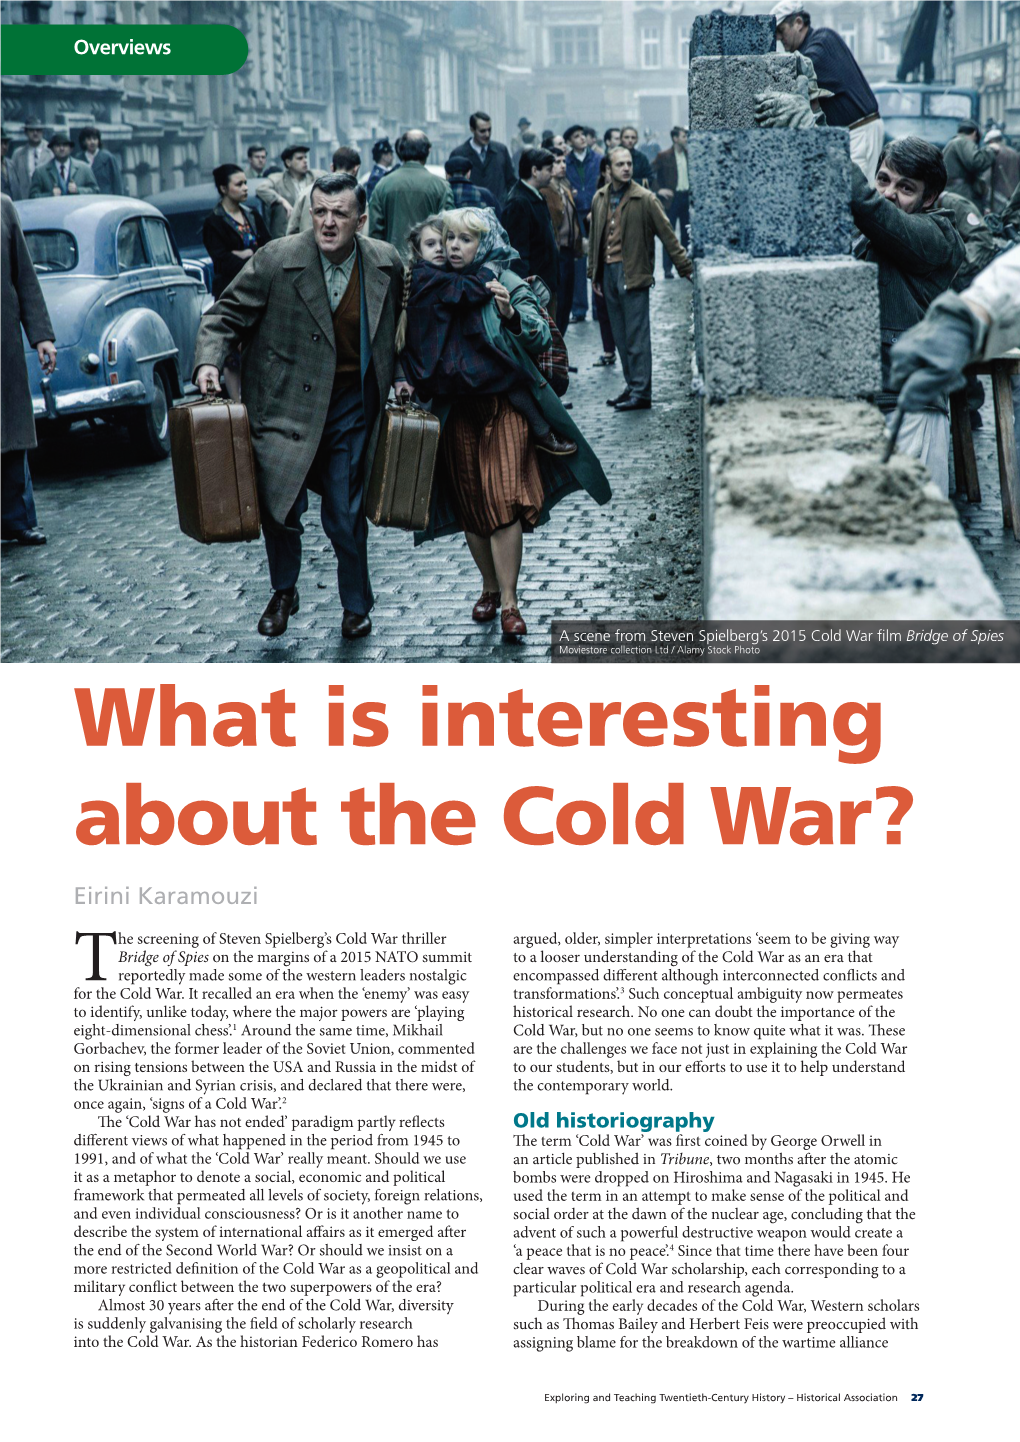 What Is Interesting About the Cold War? Eirini Karamouzi